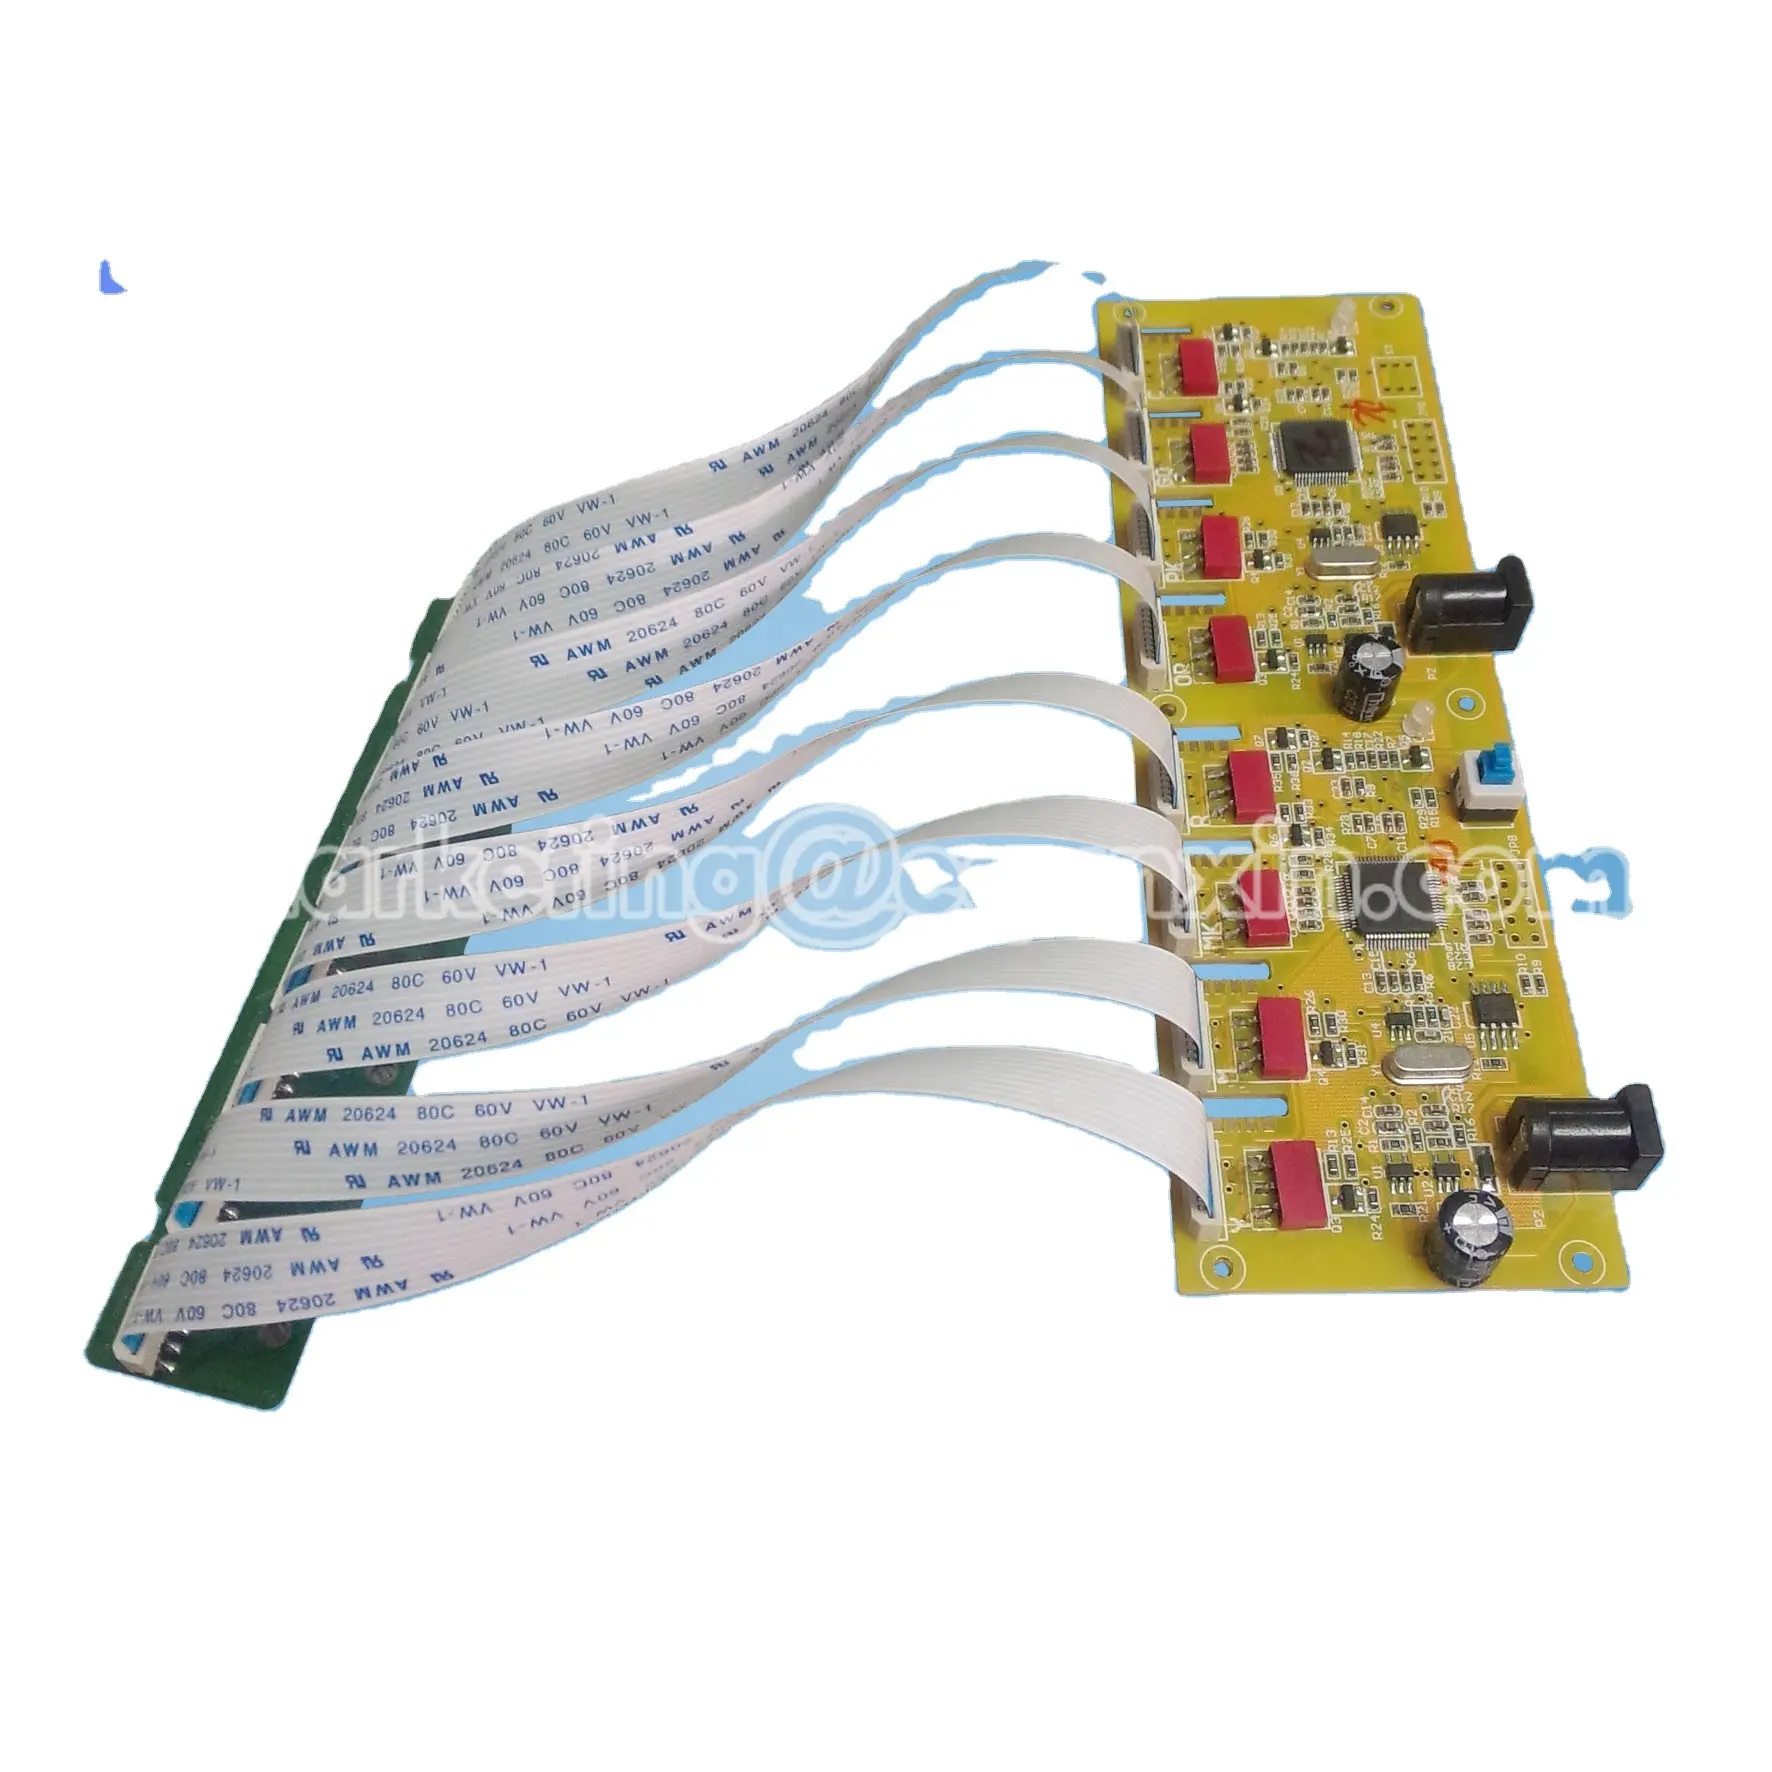 R2000 Chip decoder for Cartridge T1590 - T1599